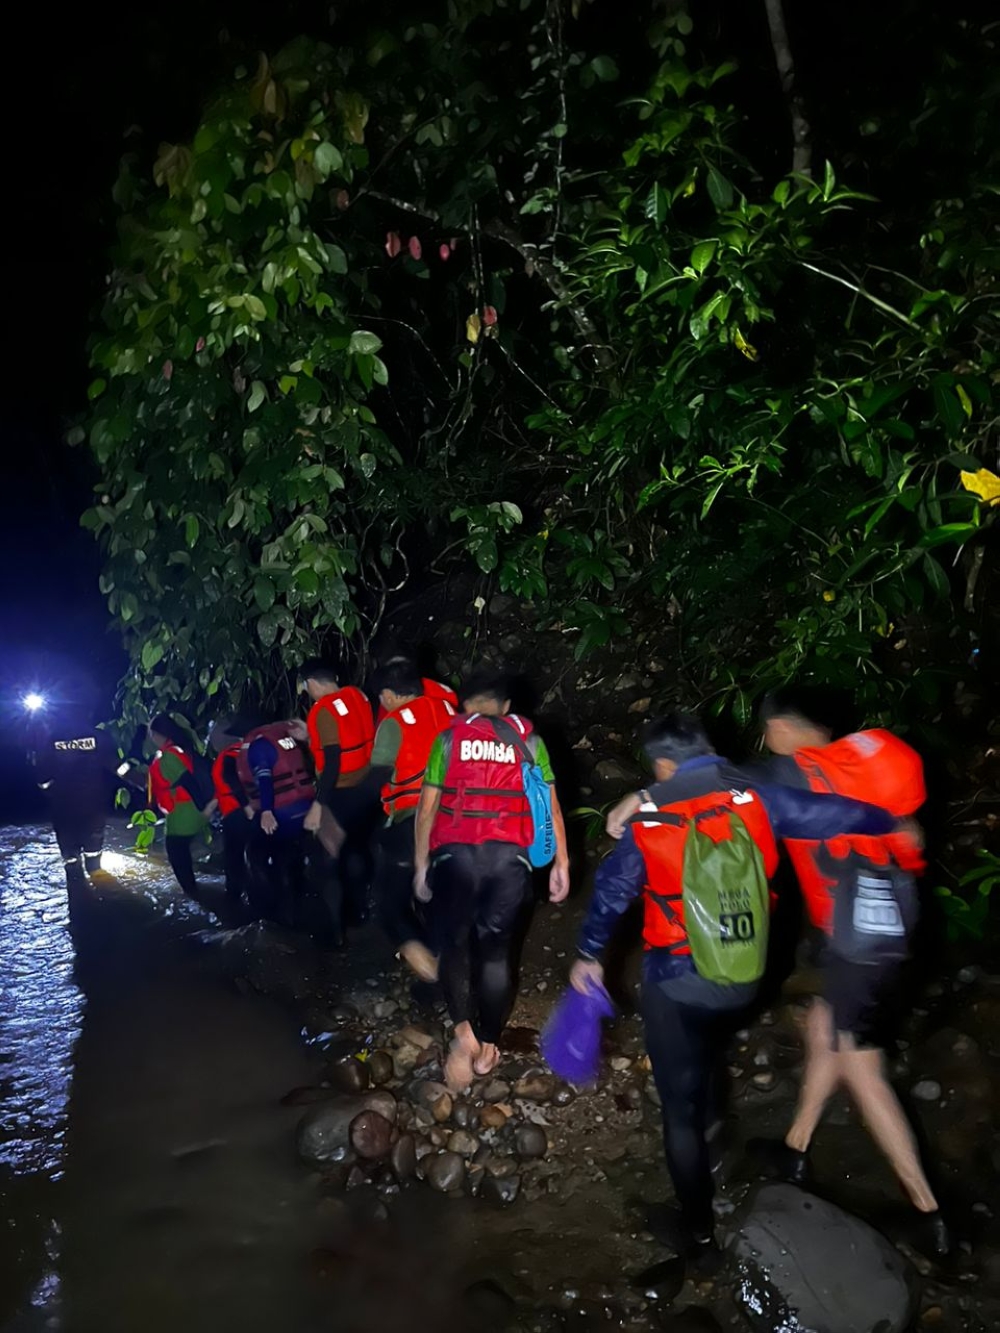 sabah searchers looking for three missing hikers in lahad datu; bodies of three more found drowned